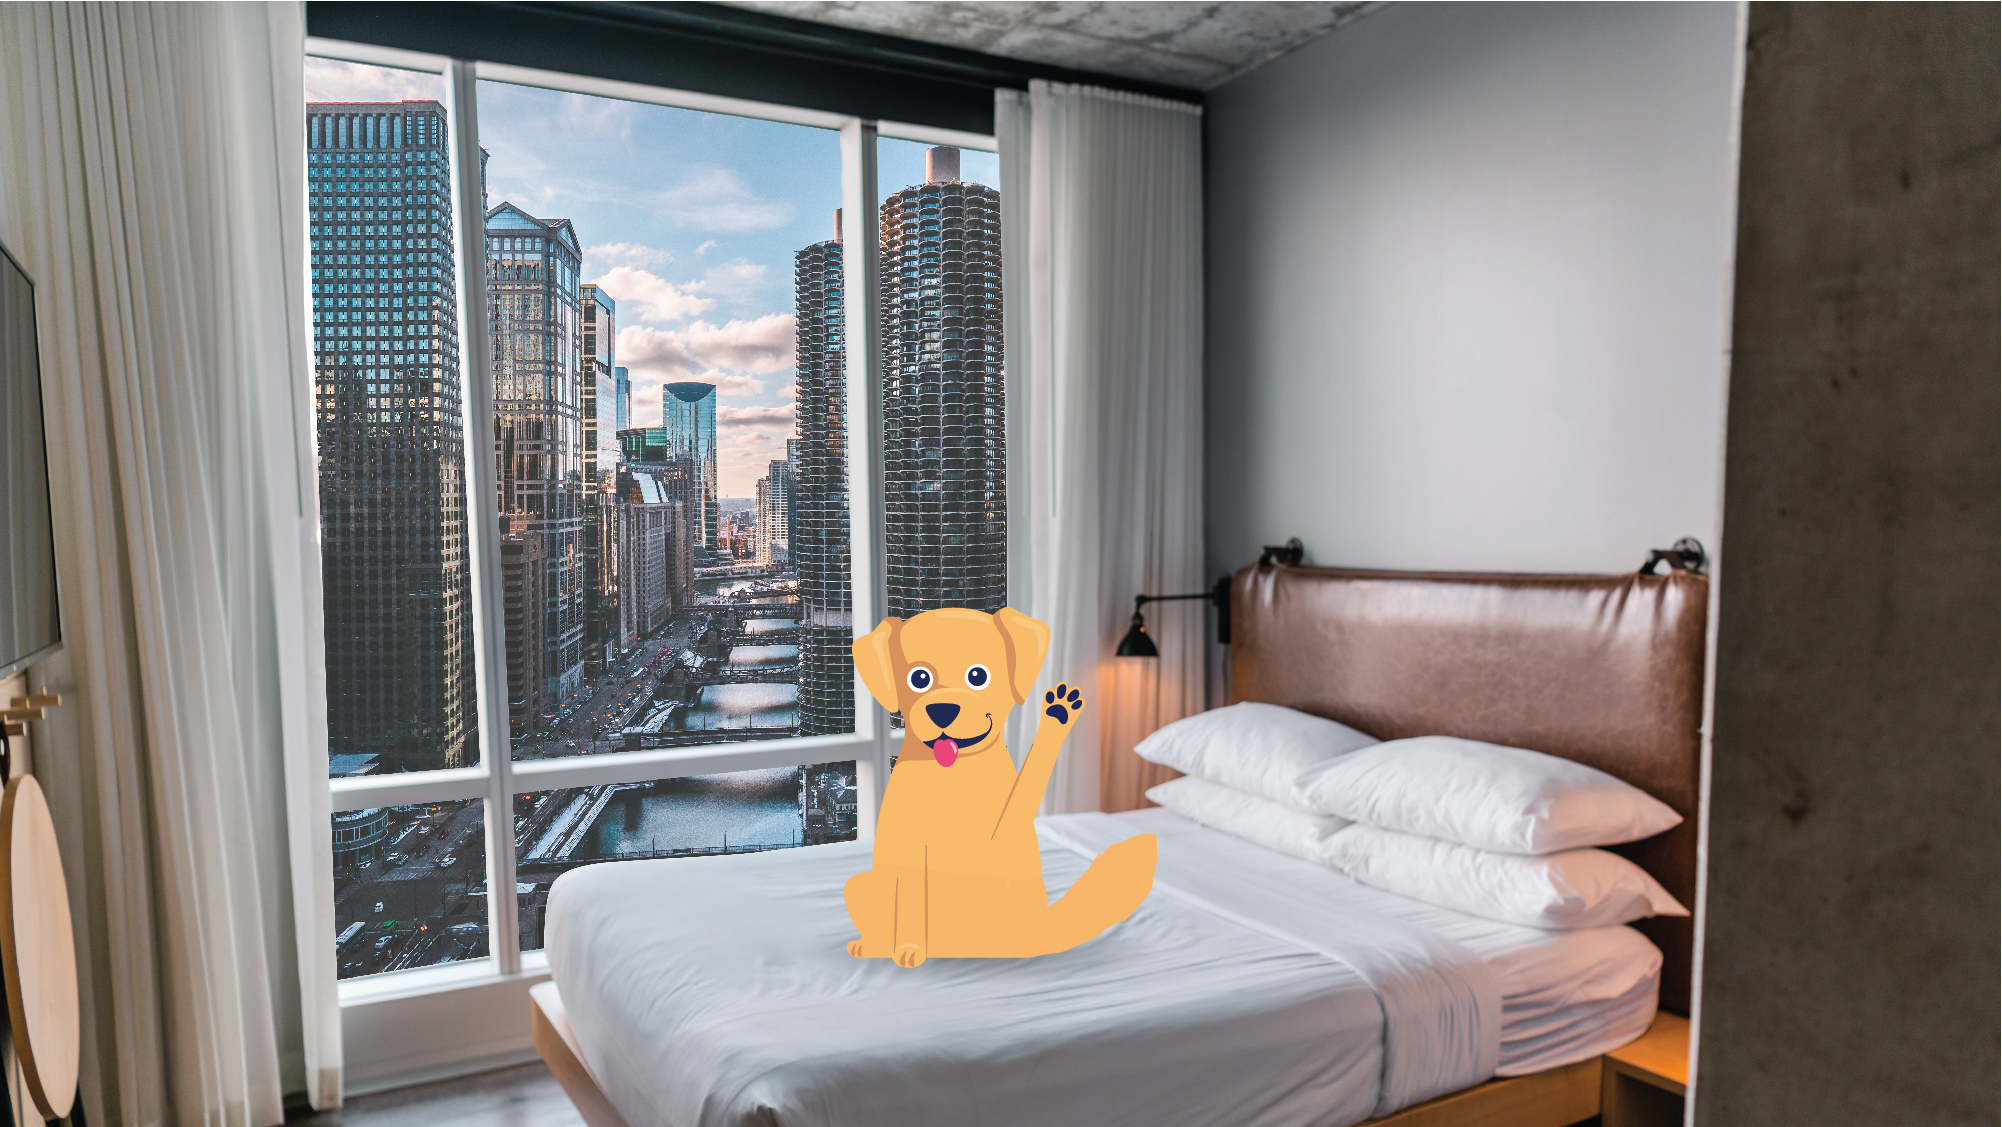 Top 5 Pet-Friendly Airbnbs in Chicago, IL